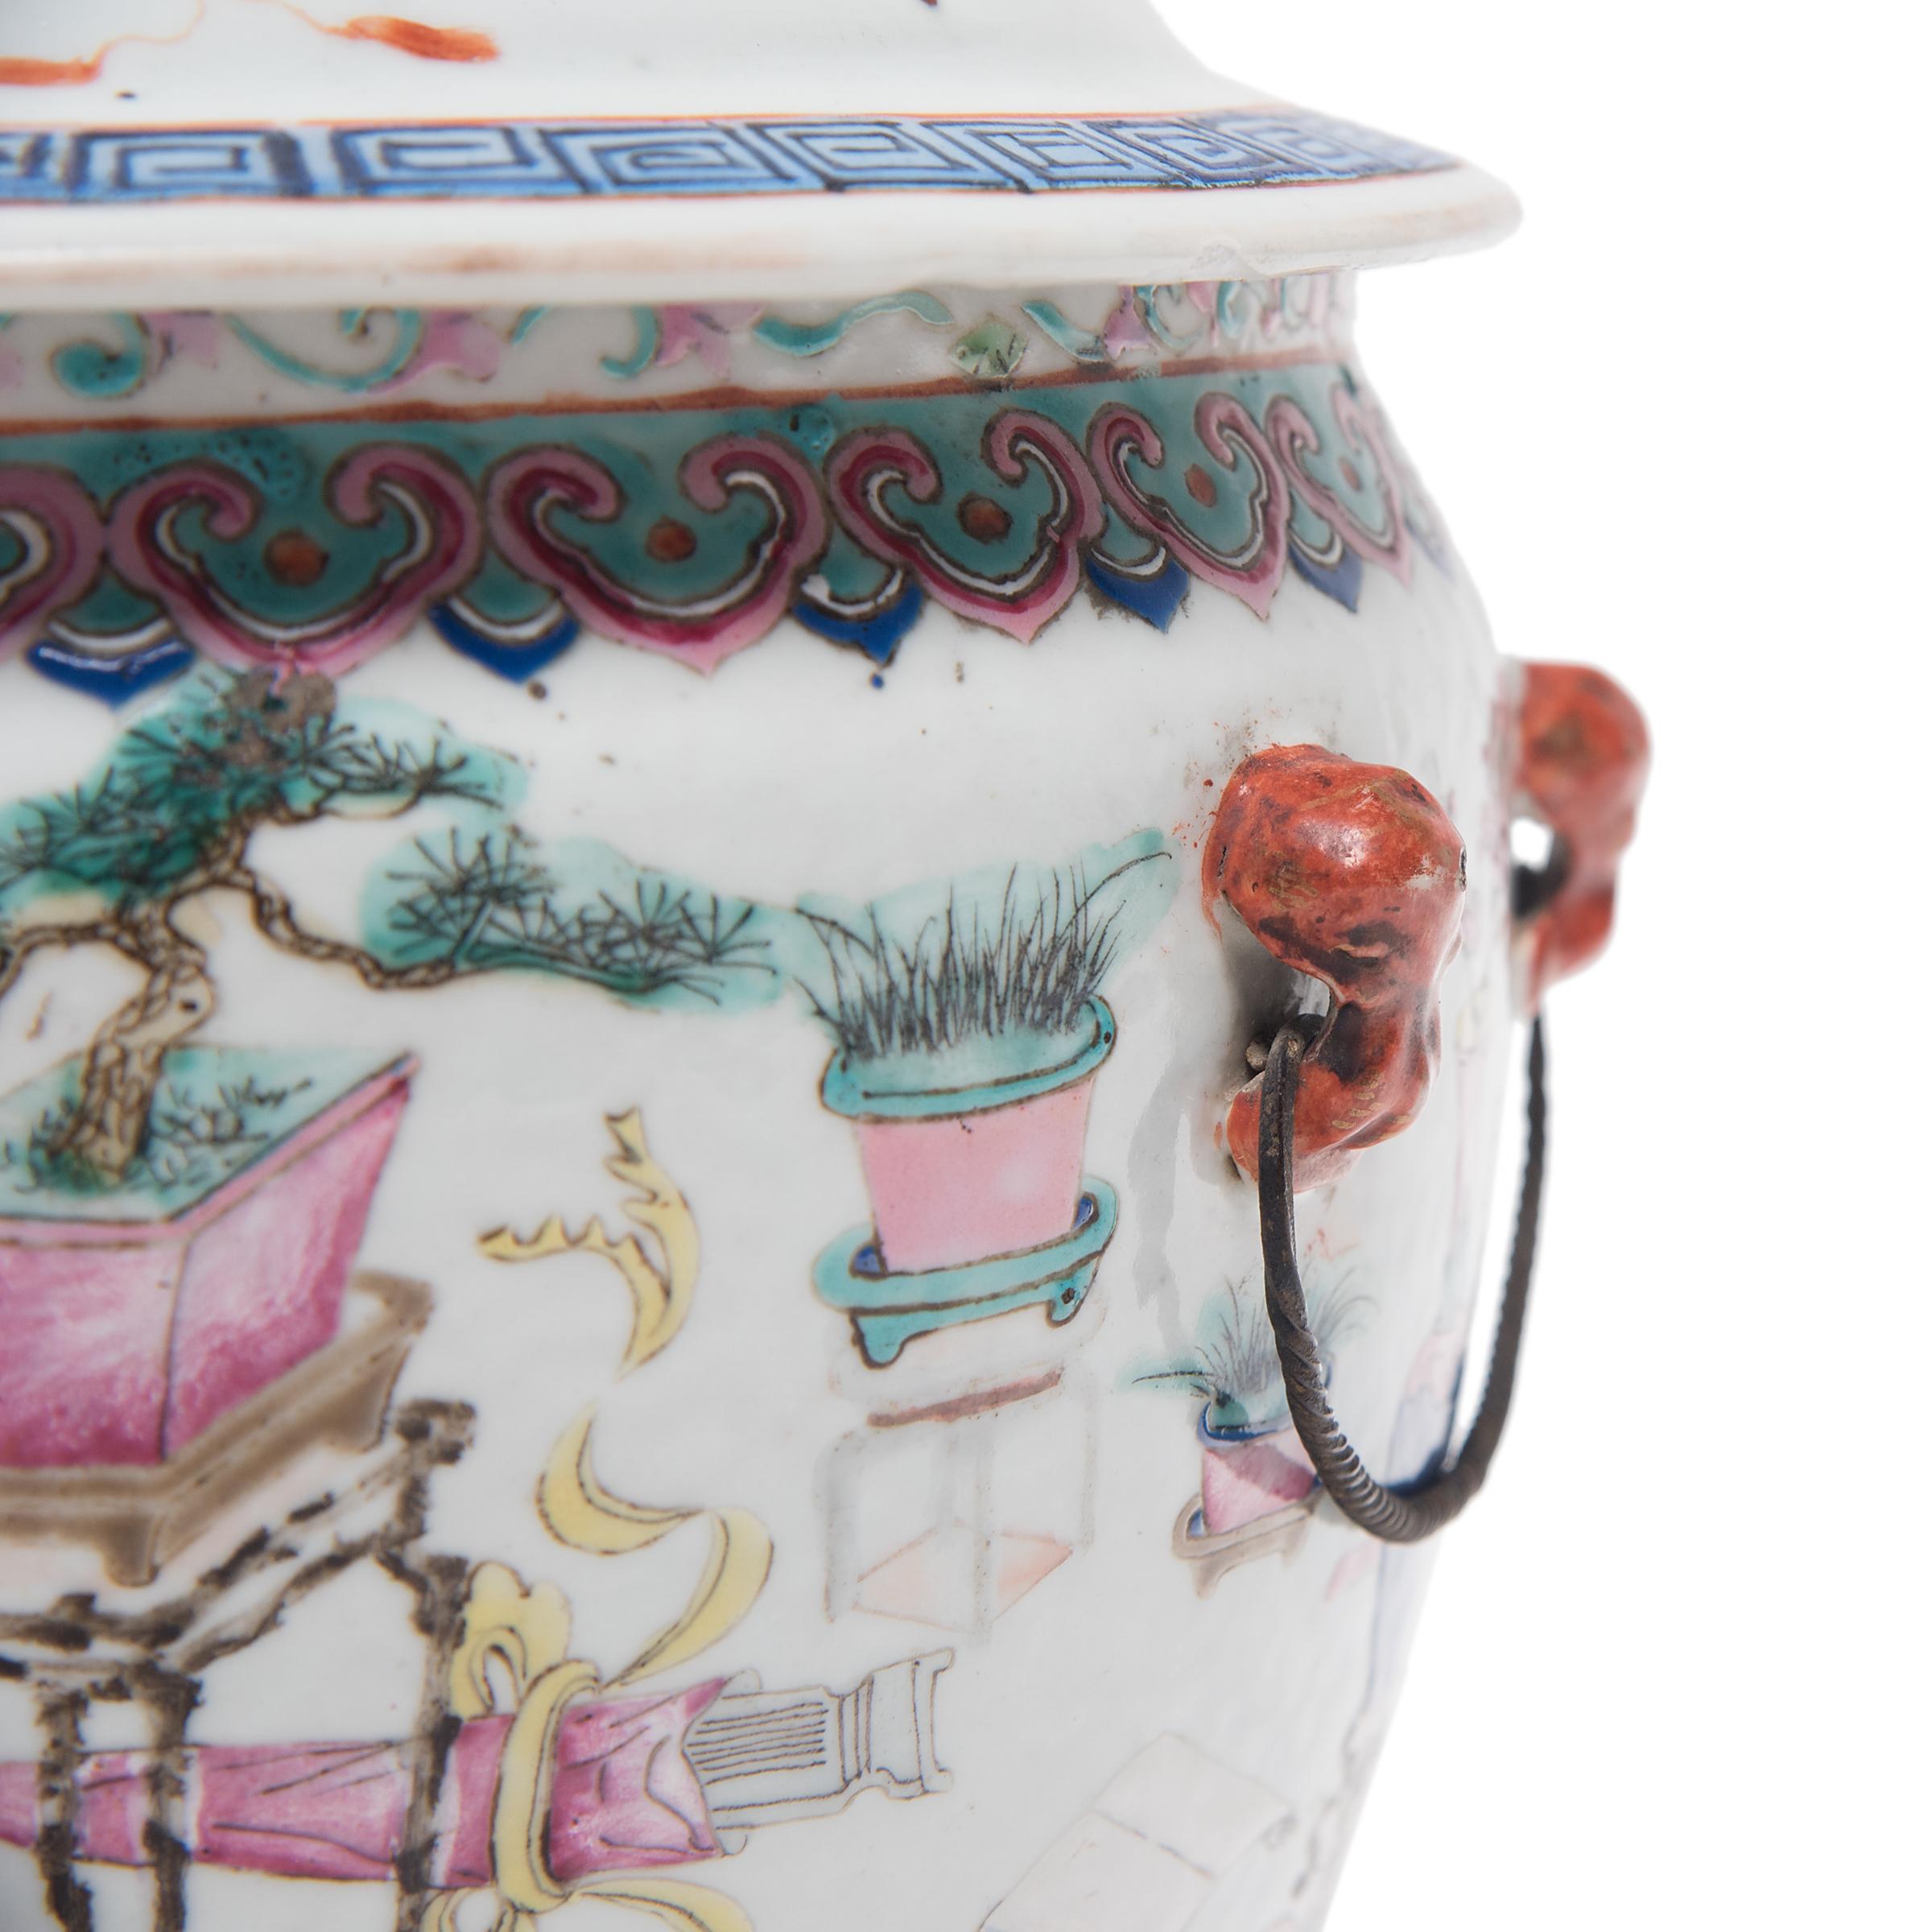 Porcelain Chinese Famille Rose Soup Tureen with Scholars' Objects, c. 1900